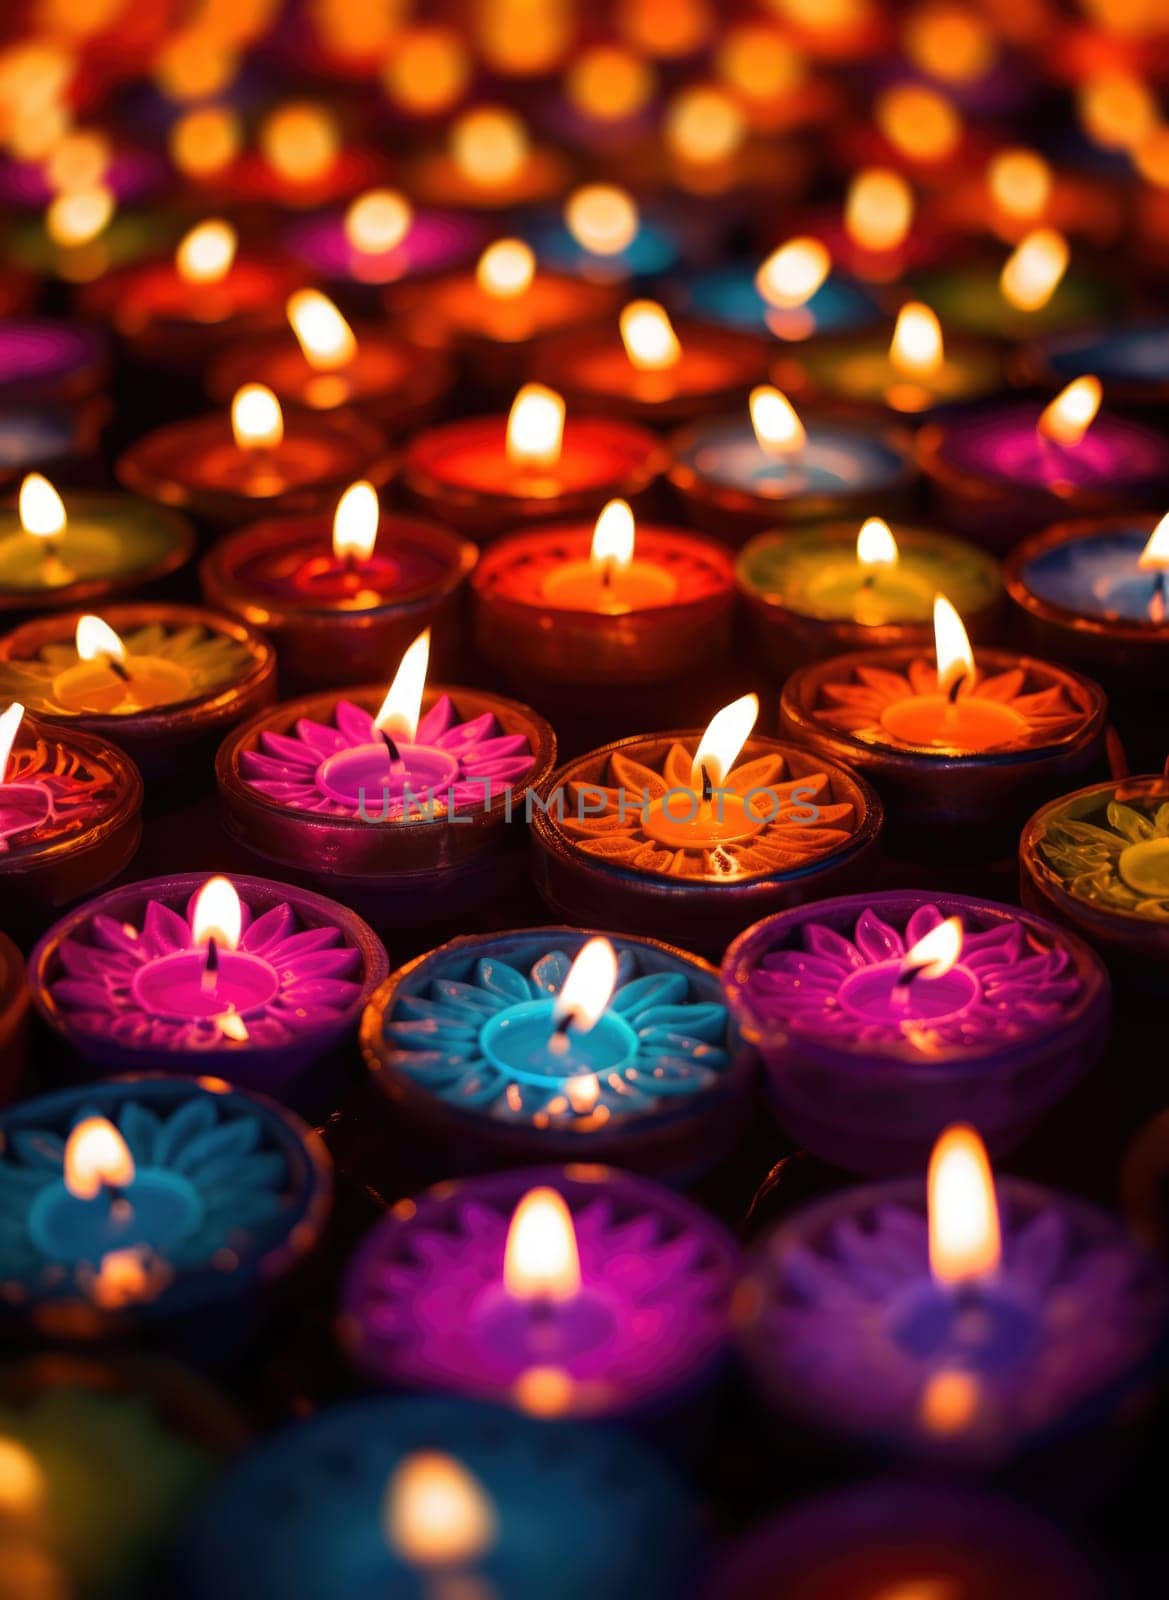 Happy diwali - Burning oil lamps with colorful designs from a Diwali festival